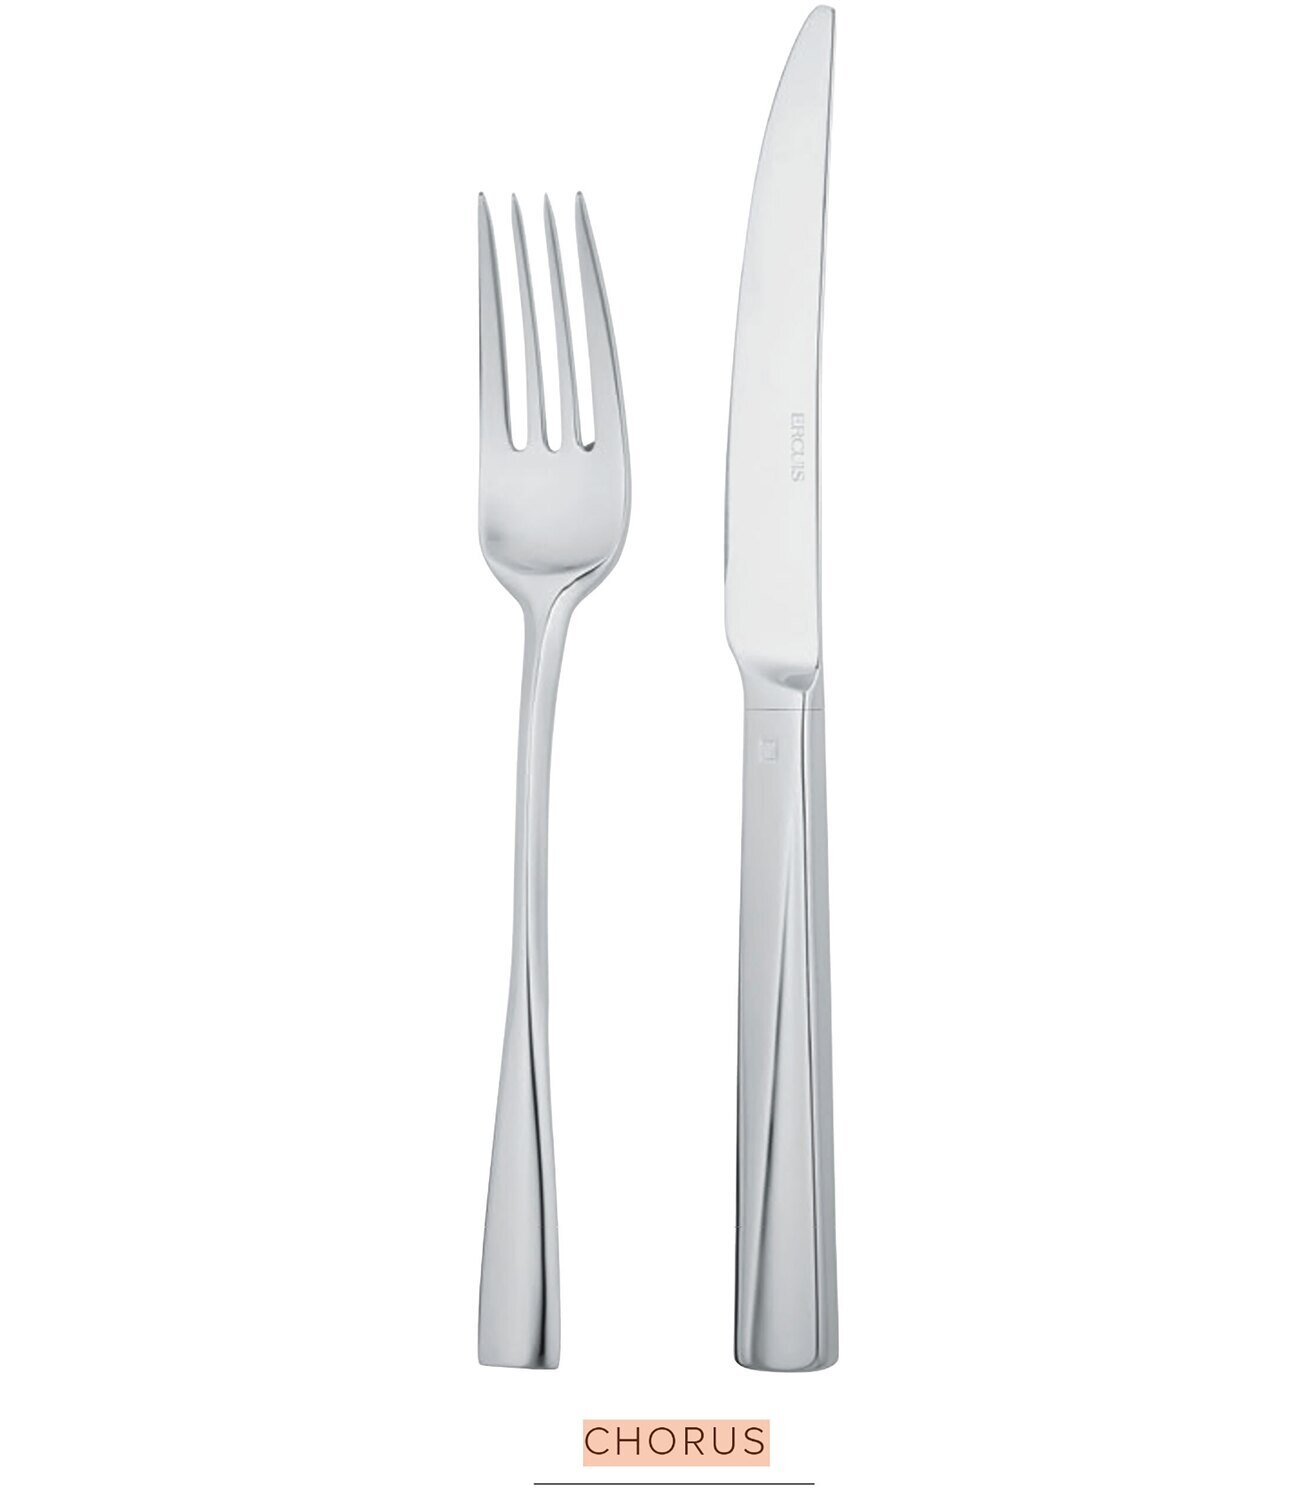 Ercuis Chorus 5 Piece Place Setting Silver Plated F665060-DF